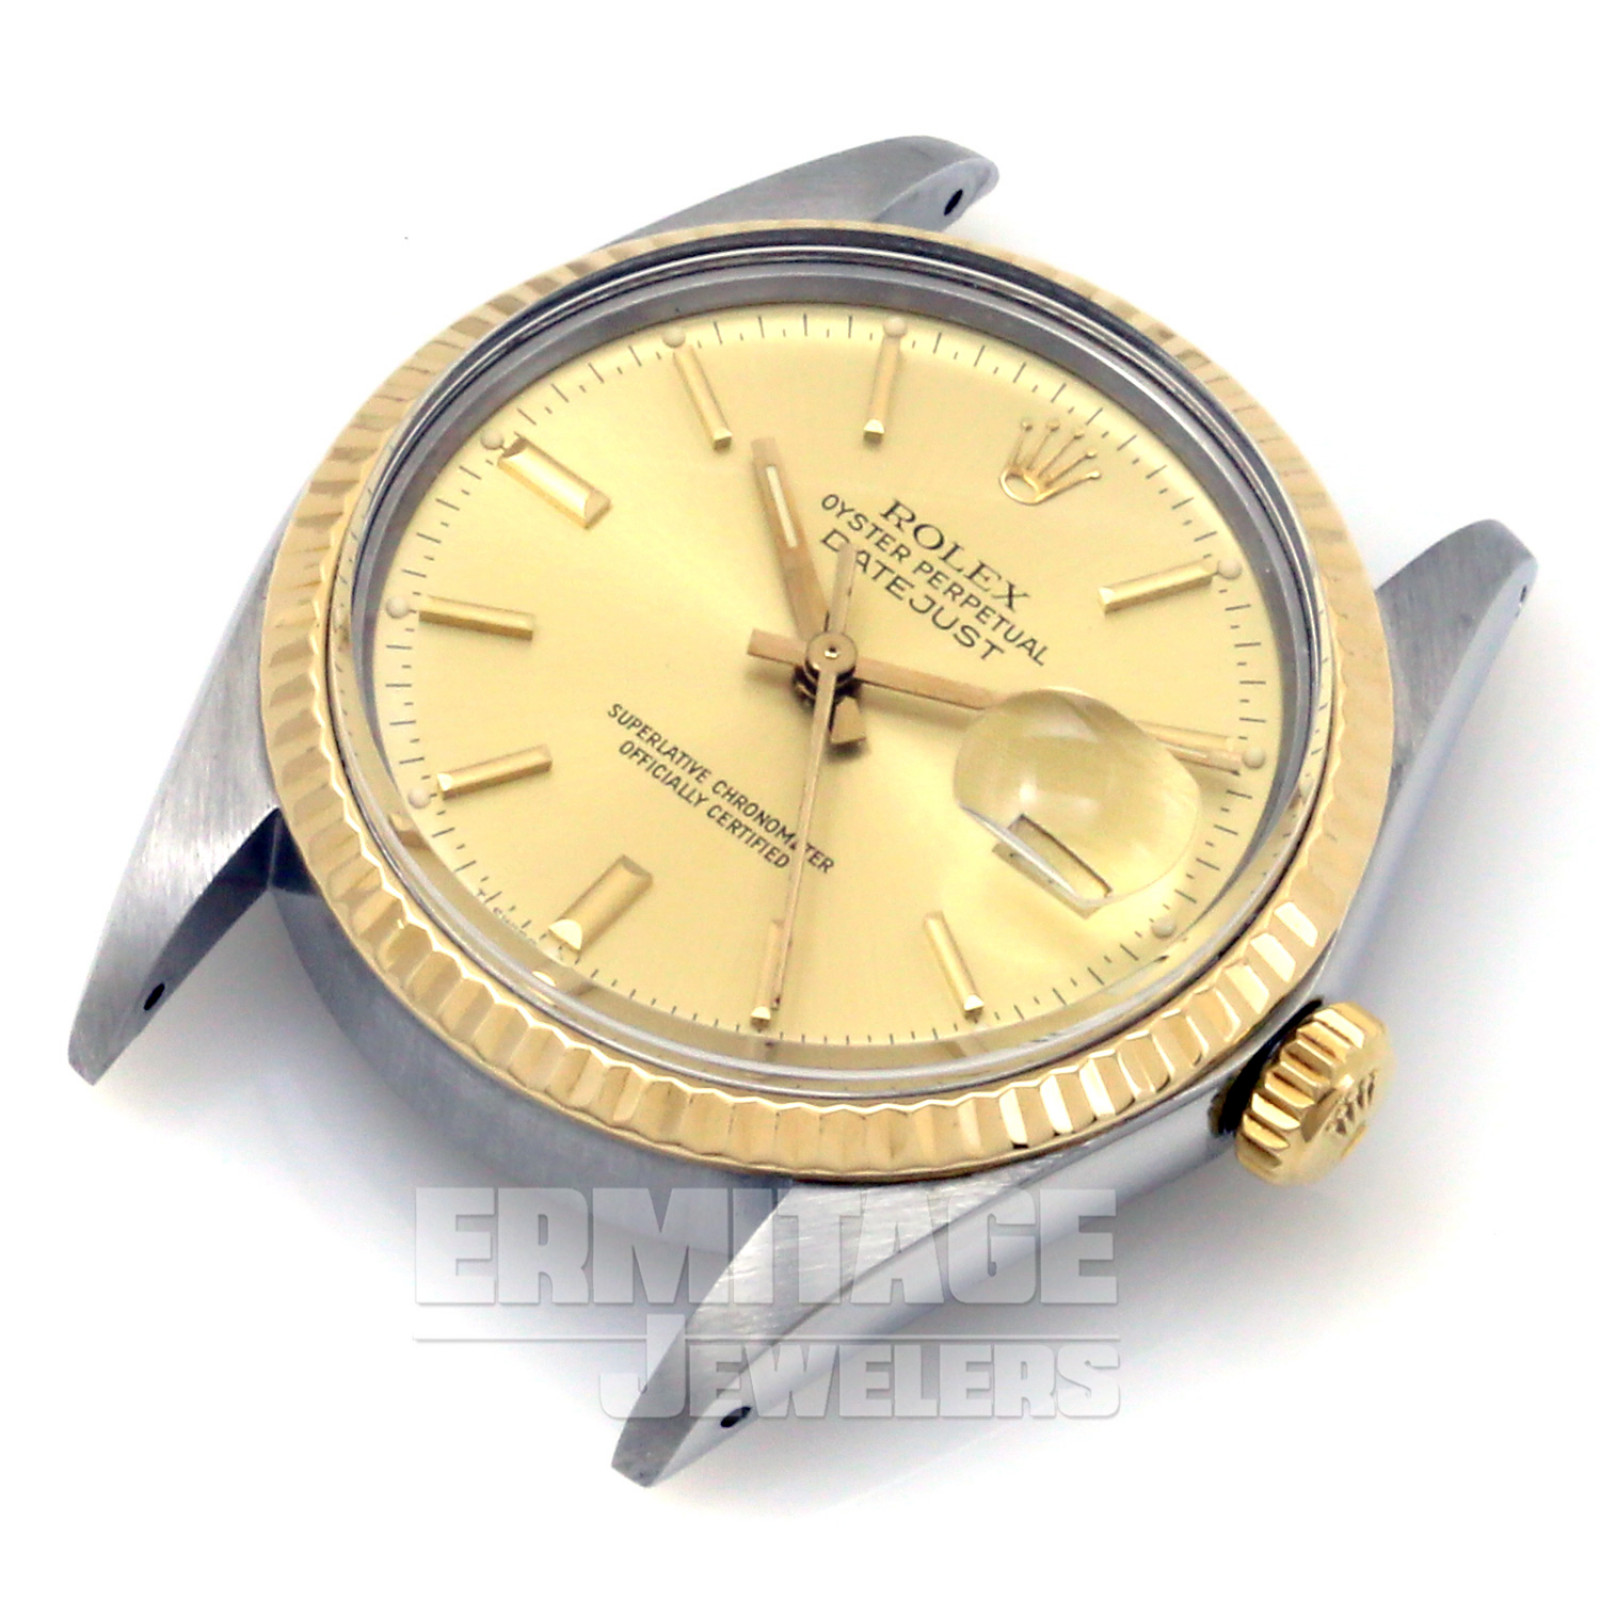 Classic Rolex Datejust 16013 with Champagne Dial